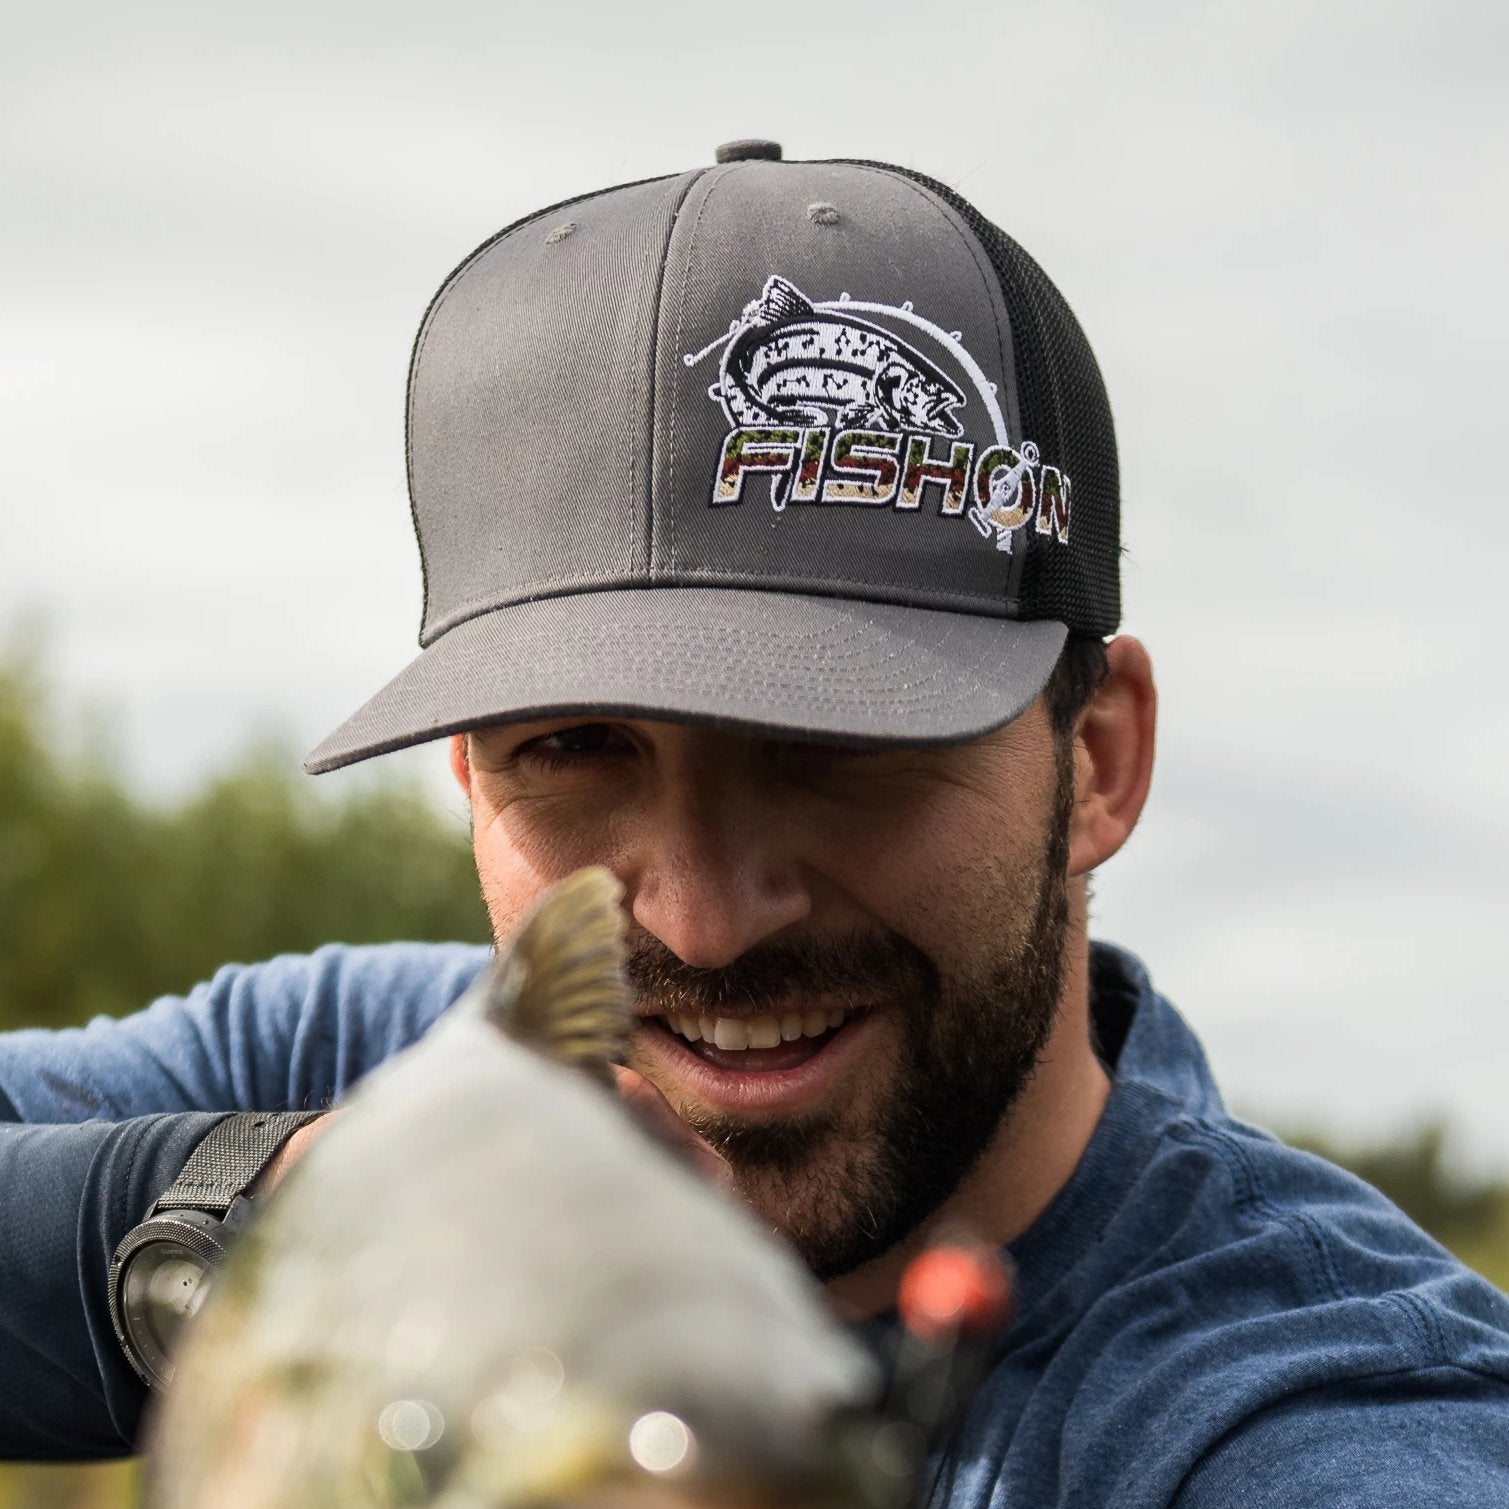 NEW - FishON Trout hat (USA Flag)